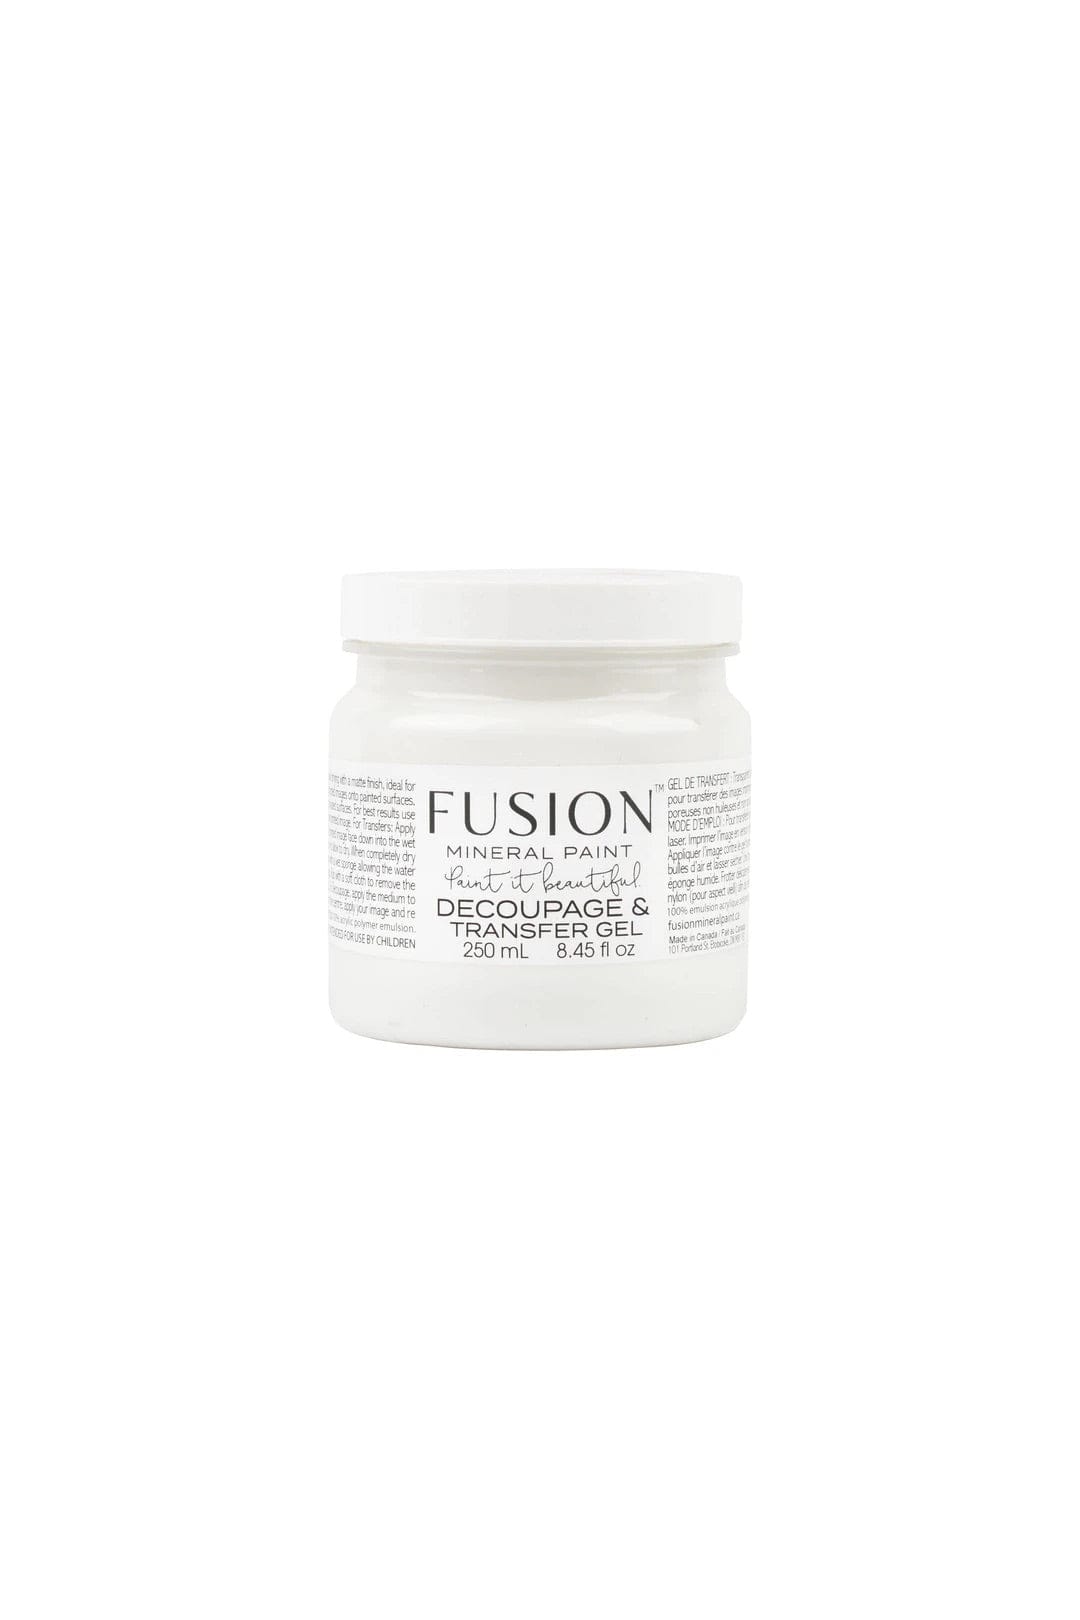 Fusion Fusion Mineral Paint Fusion Transfer & Decoupage Gel